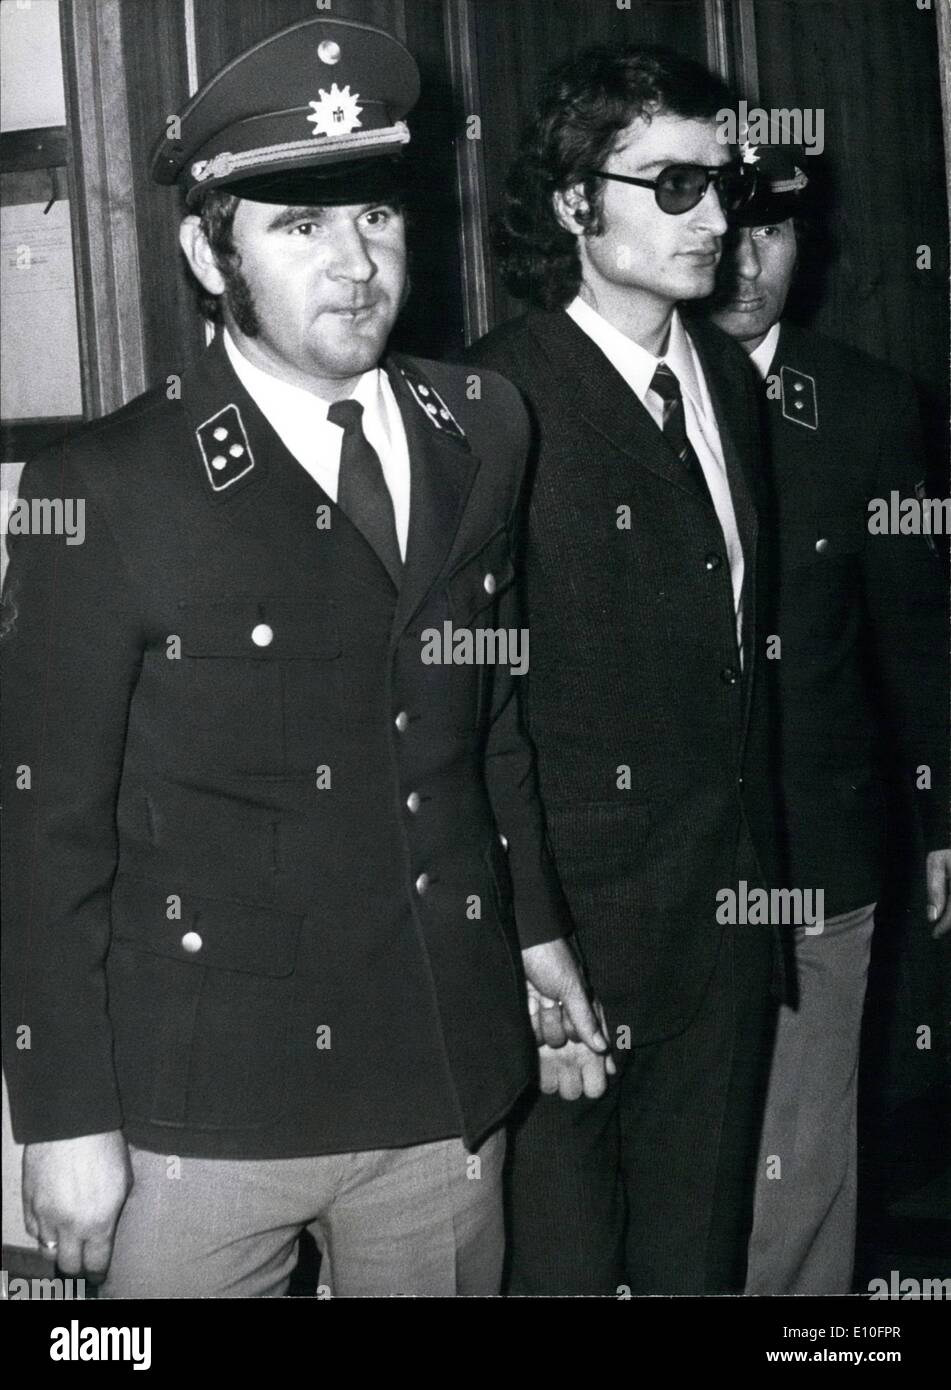 Oct. 10, 1972 - Trial against Dimitri Todorov started: The trial against the bankrobber of the Deutsche Bank in Munich's Prinzregentenstrae in August 4th 1971, Dimitri Todorov, began now in Munich. During the action his complice Hans-Georg Rmmalemayr and the hostage were shot. The trial had been delayed twice already. Stock Photo